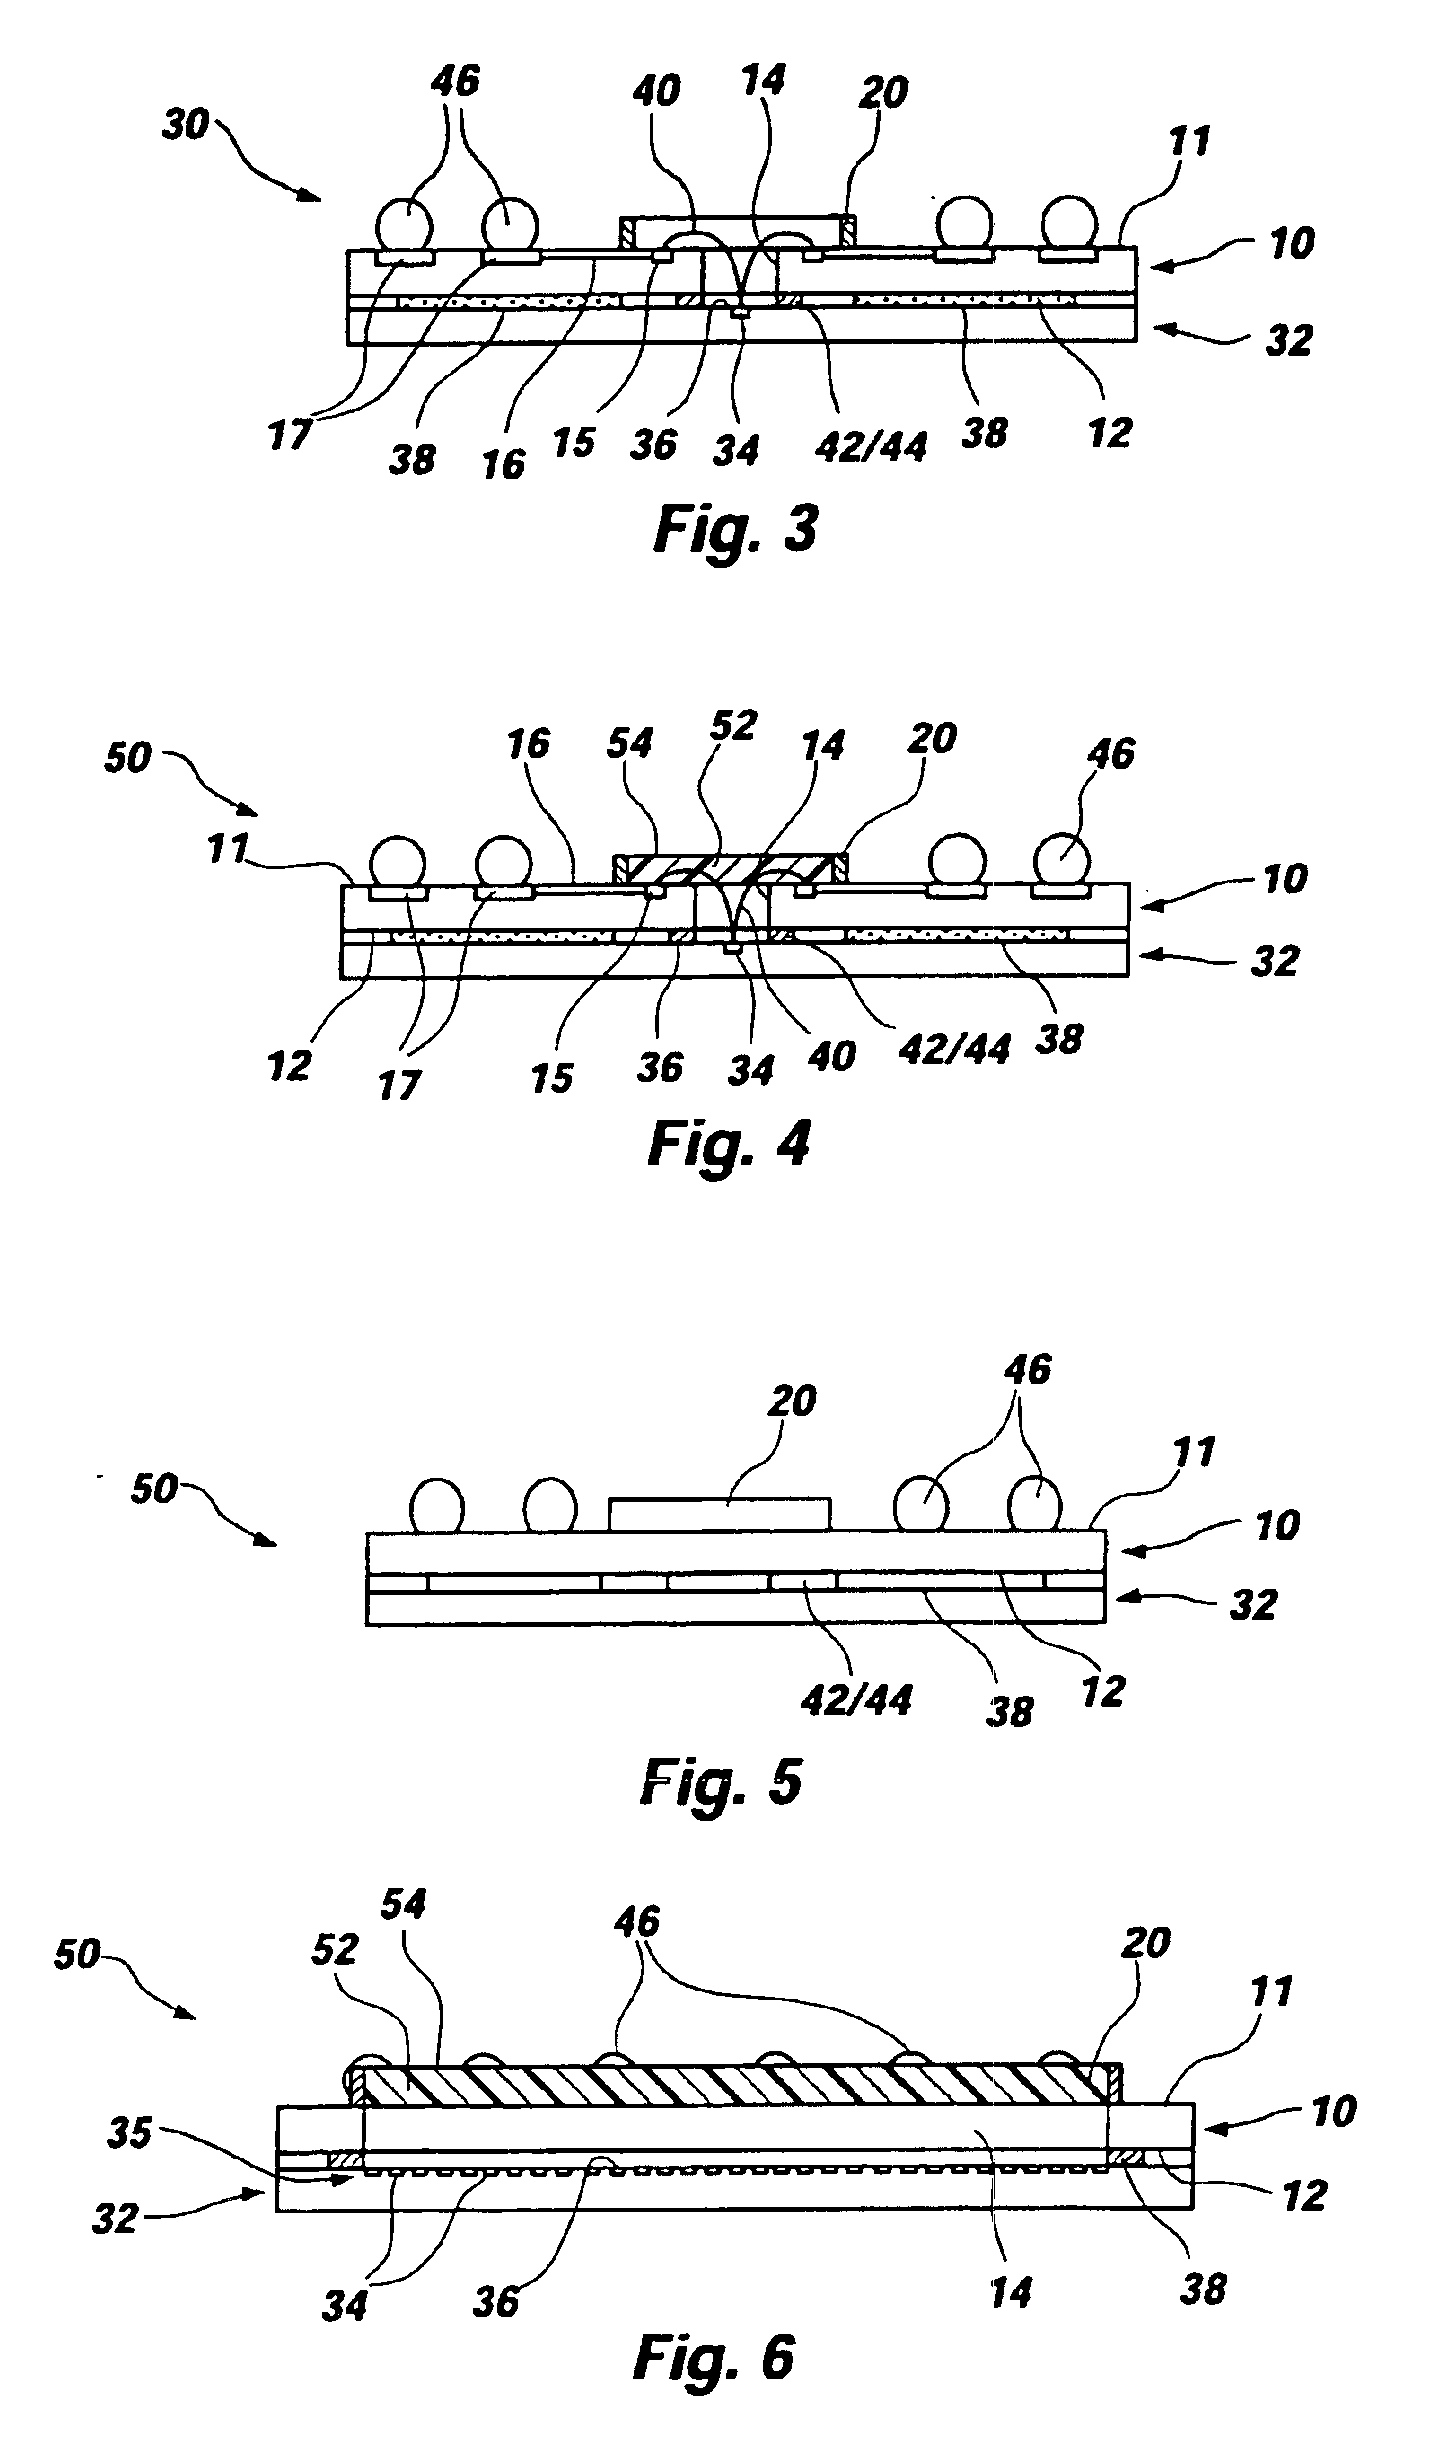 Method for fabricating interposers including upwardly protruding dams, semiconductor device assemblies including the interposers